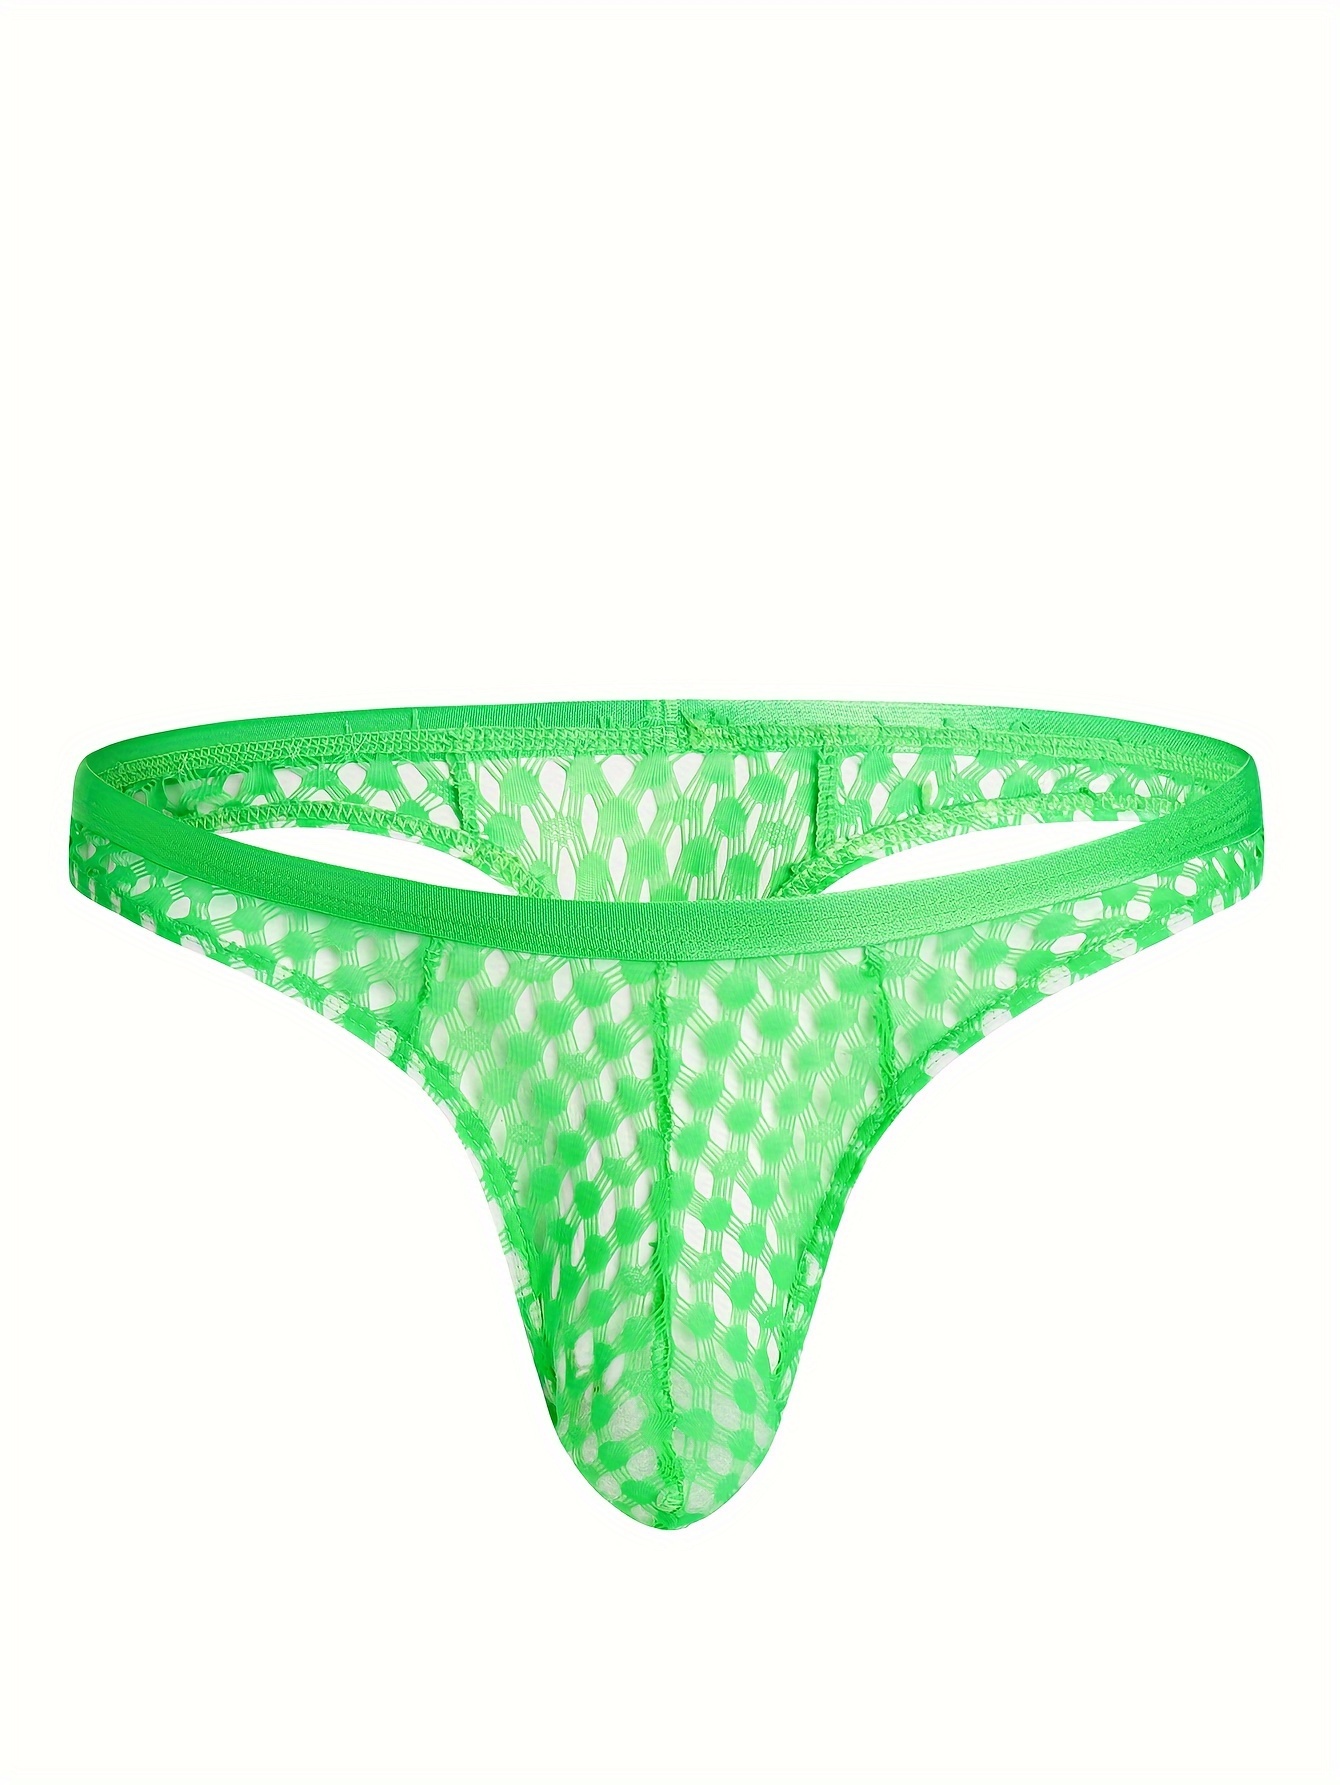 Men's Sexy-Underwear Low-Rise See Through Thong T-Back G-String